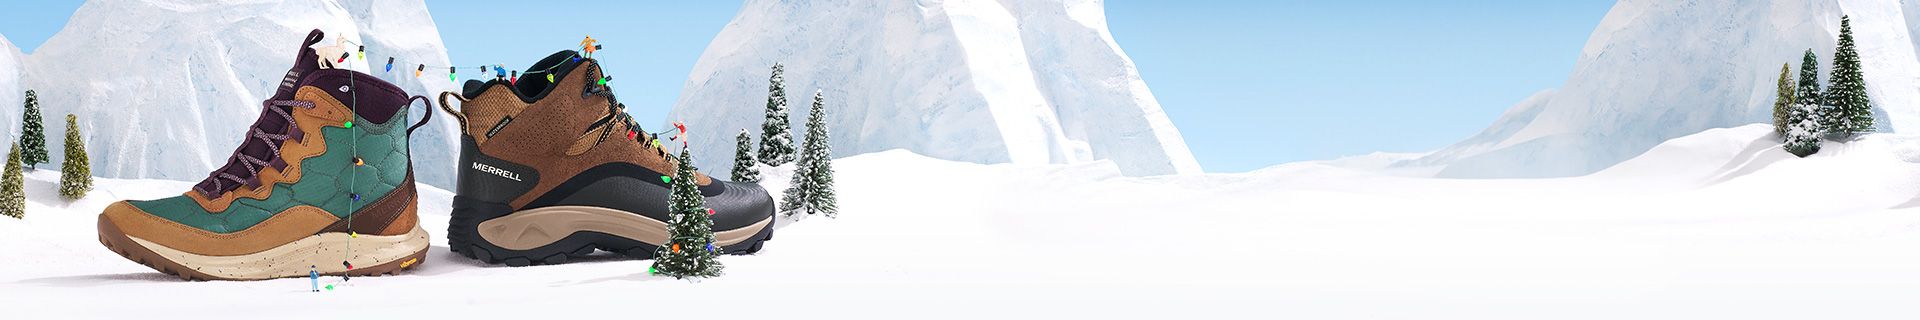 A pair of shoes in the snow with a snow covered mountain with trees in the background.